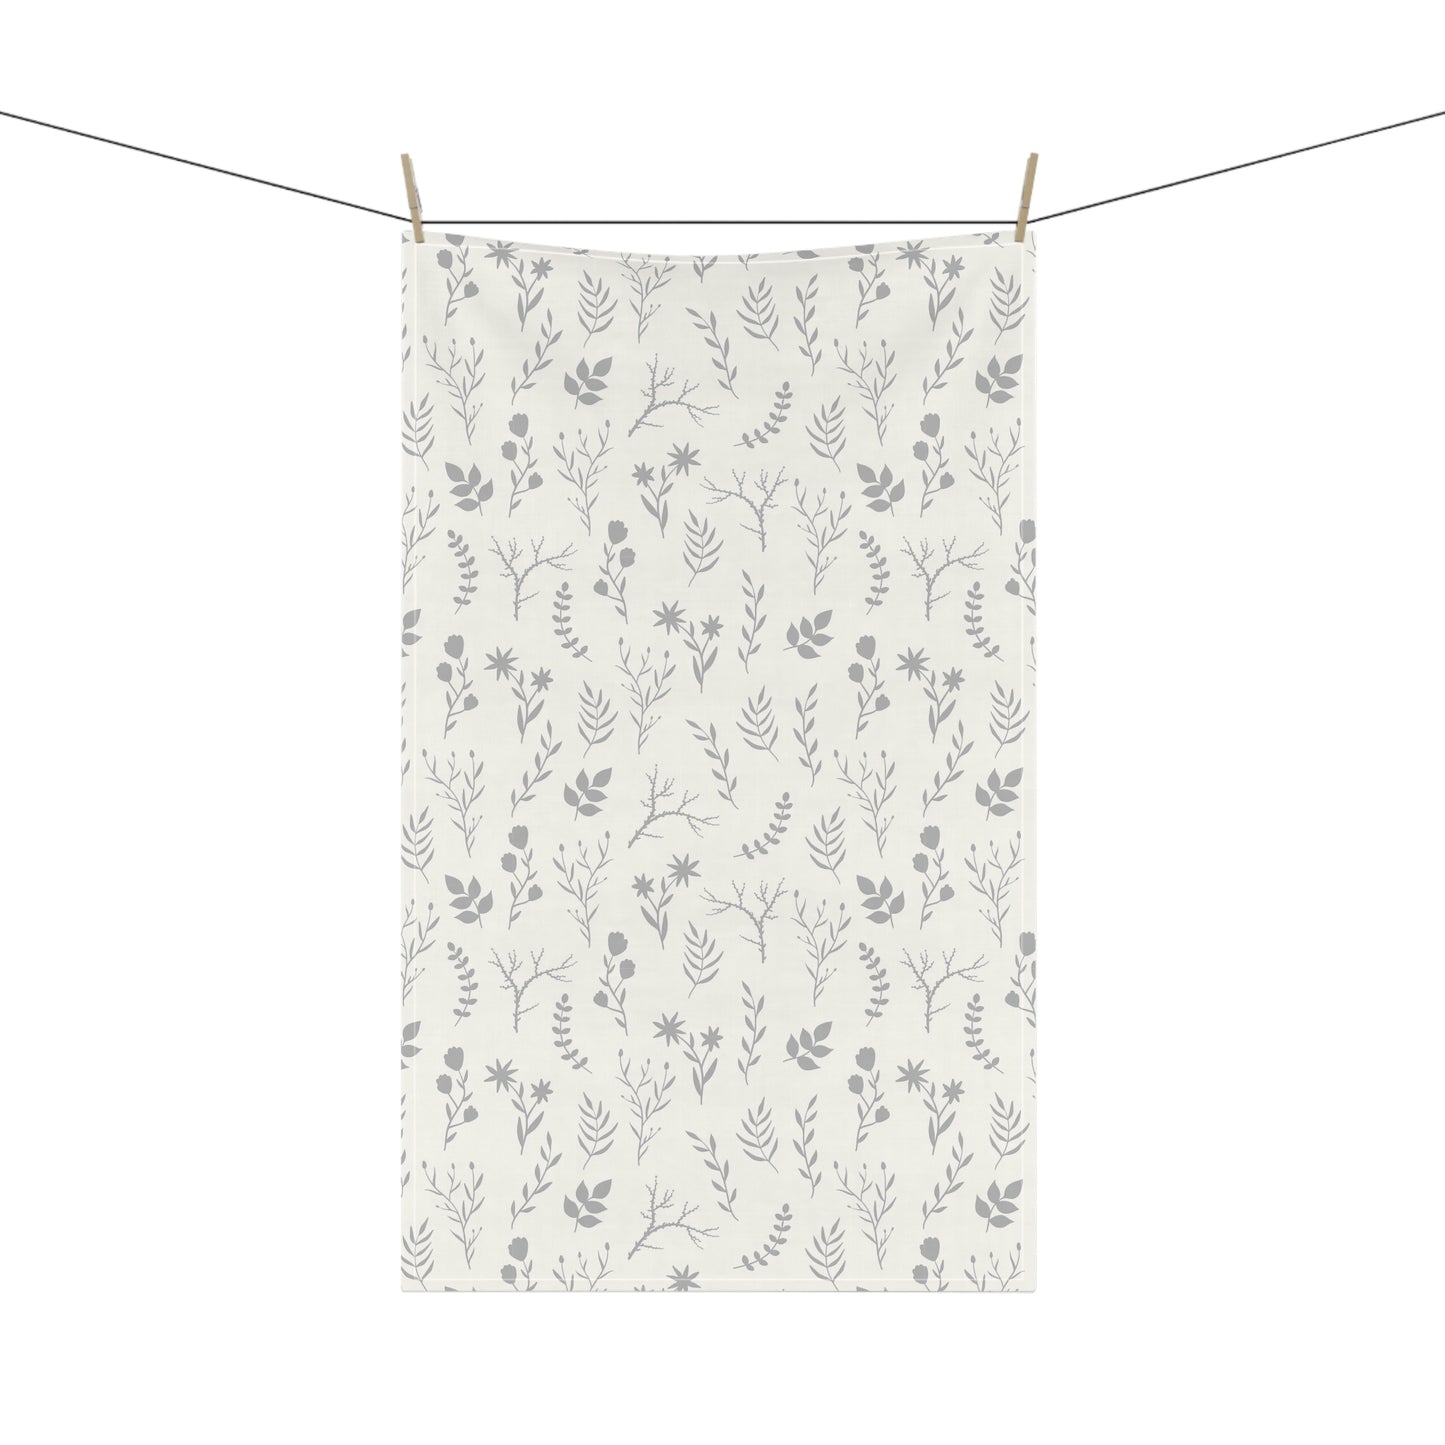 Grey and White Floral Dish Towel